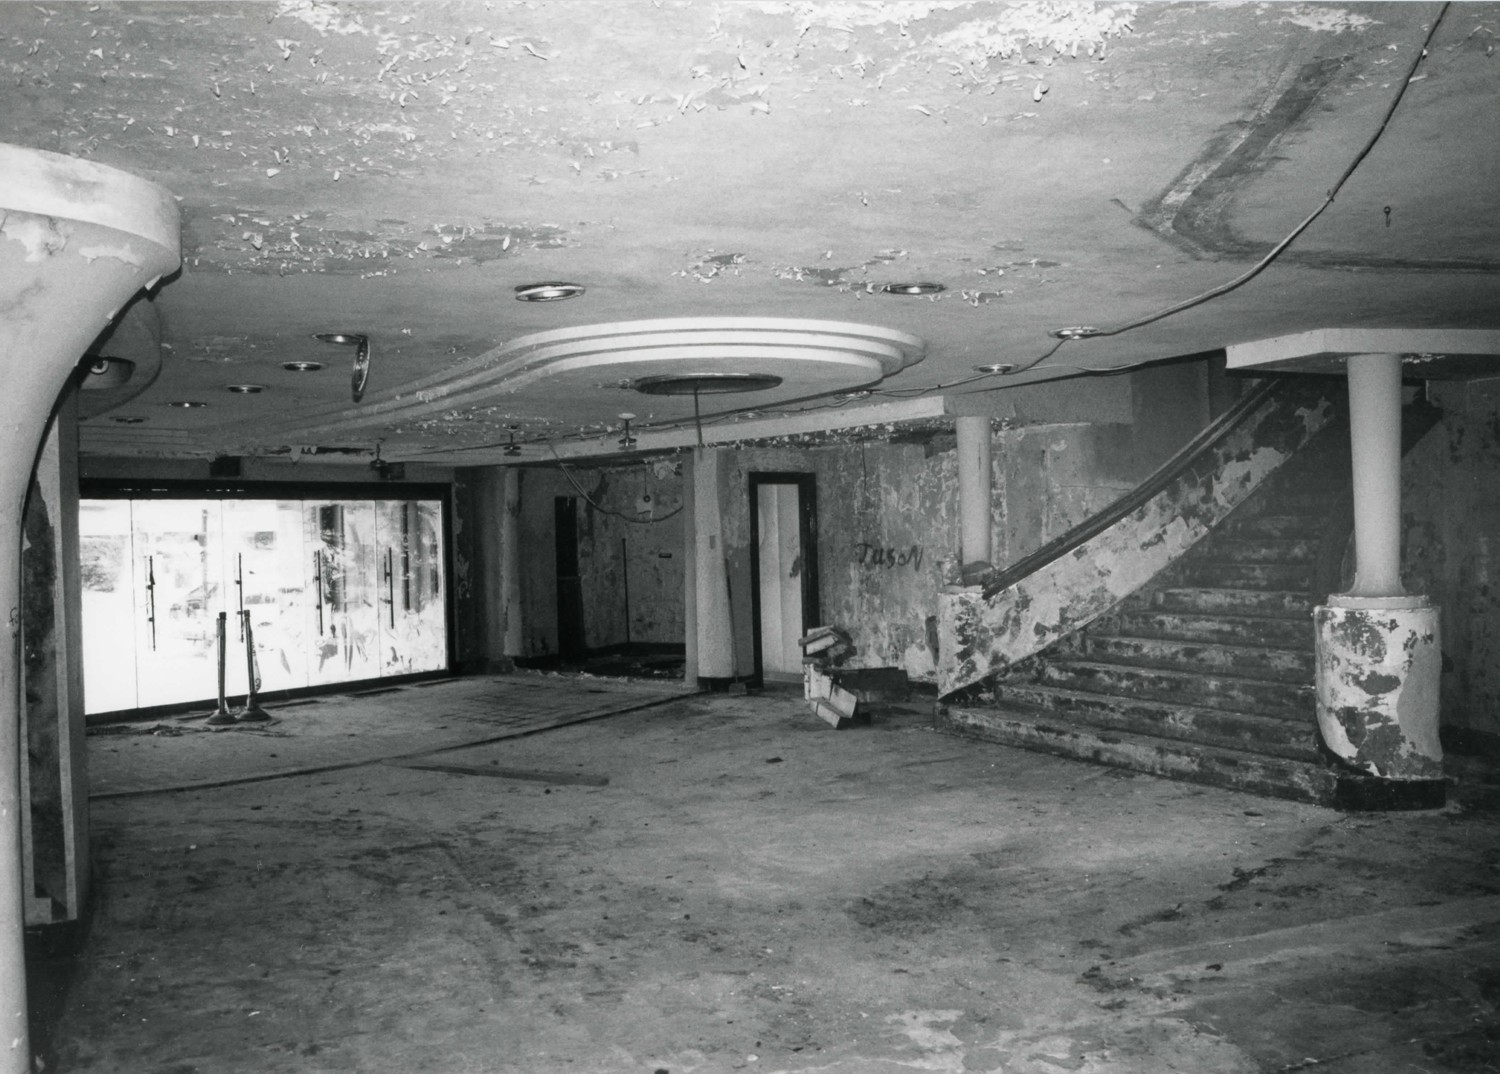 Twentieth Century Theater, Cincinnati Ohio Entry lobby and grand staircase at first floor. View towards main facade (1993)